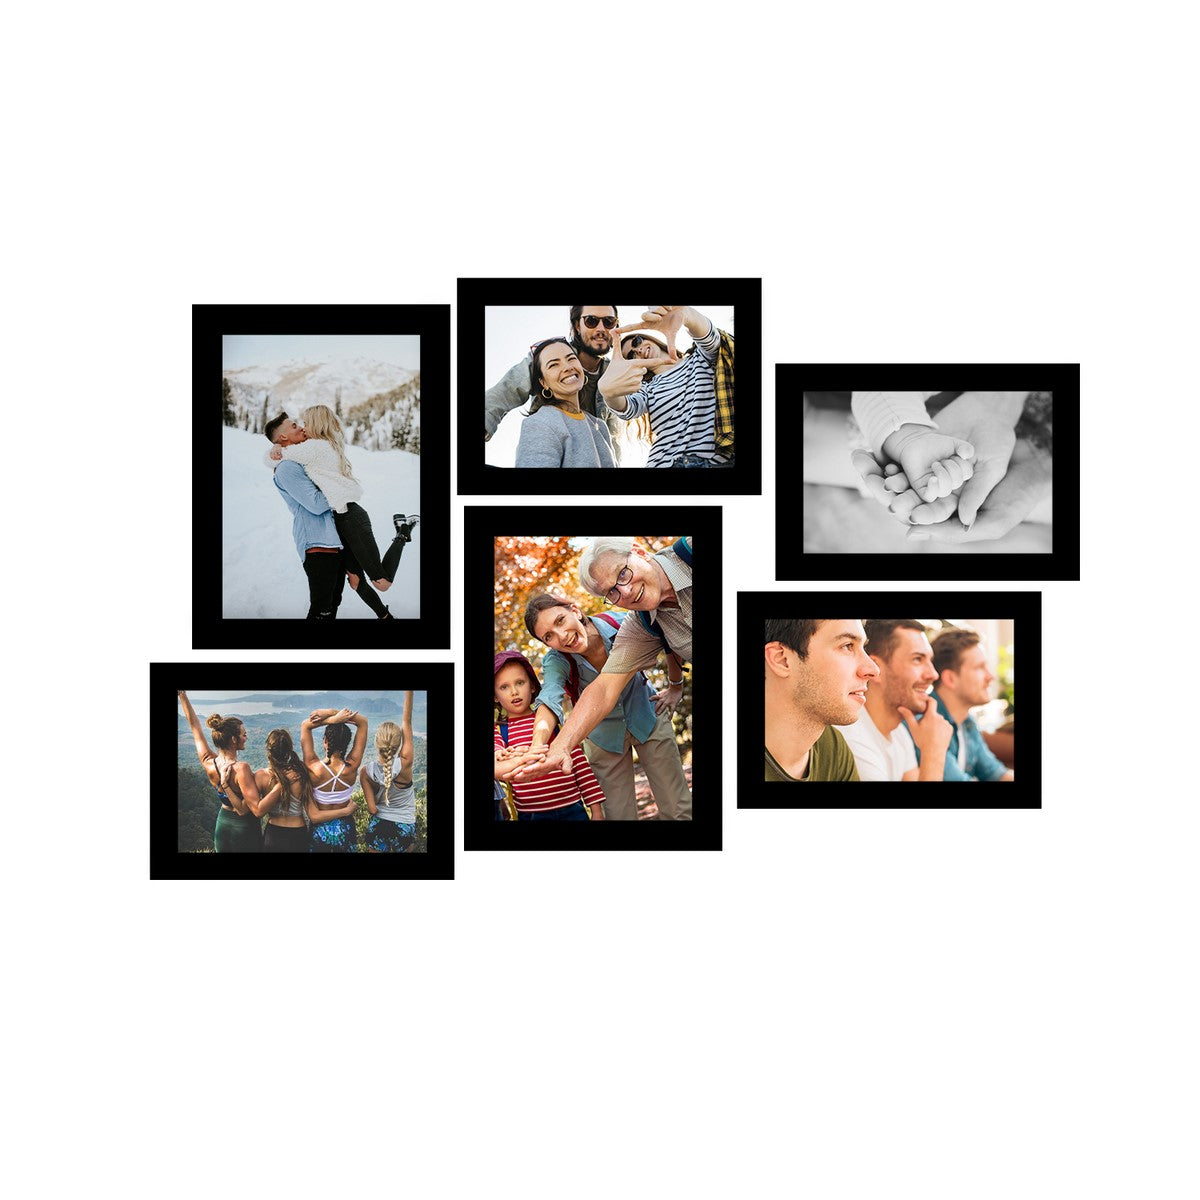 Memory Wall Collage Photo Frame - Set of 6 Photo Frames for 4 Photos of 5"x7", 2 Photos of 6"x8"